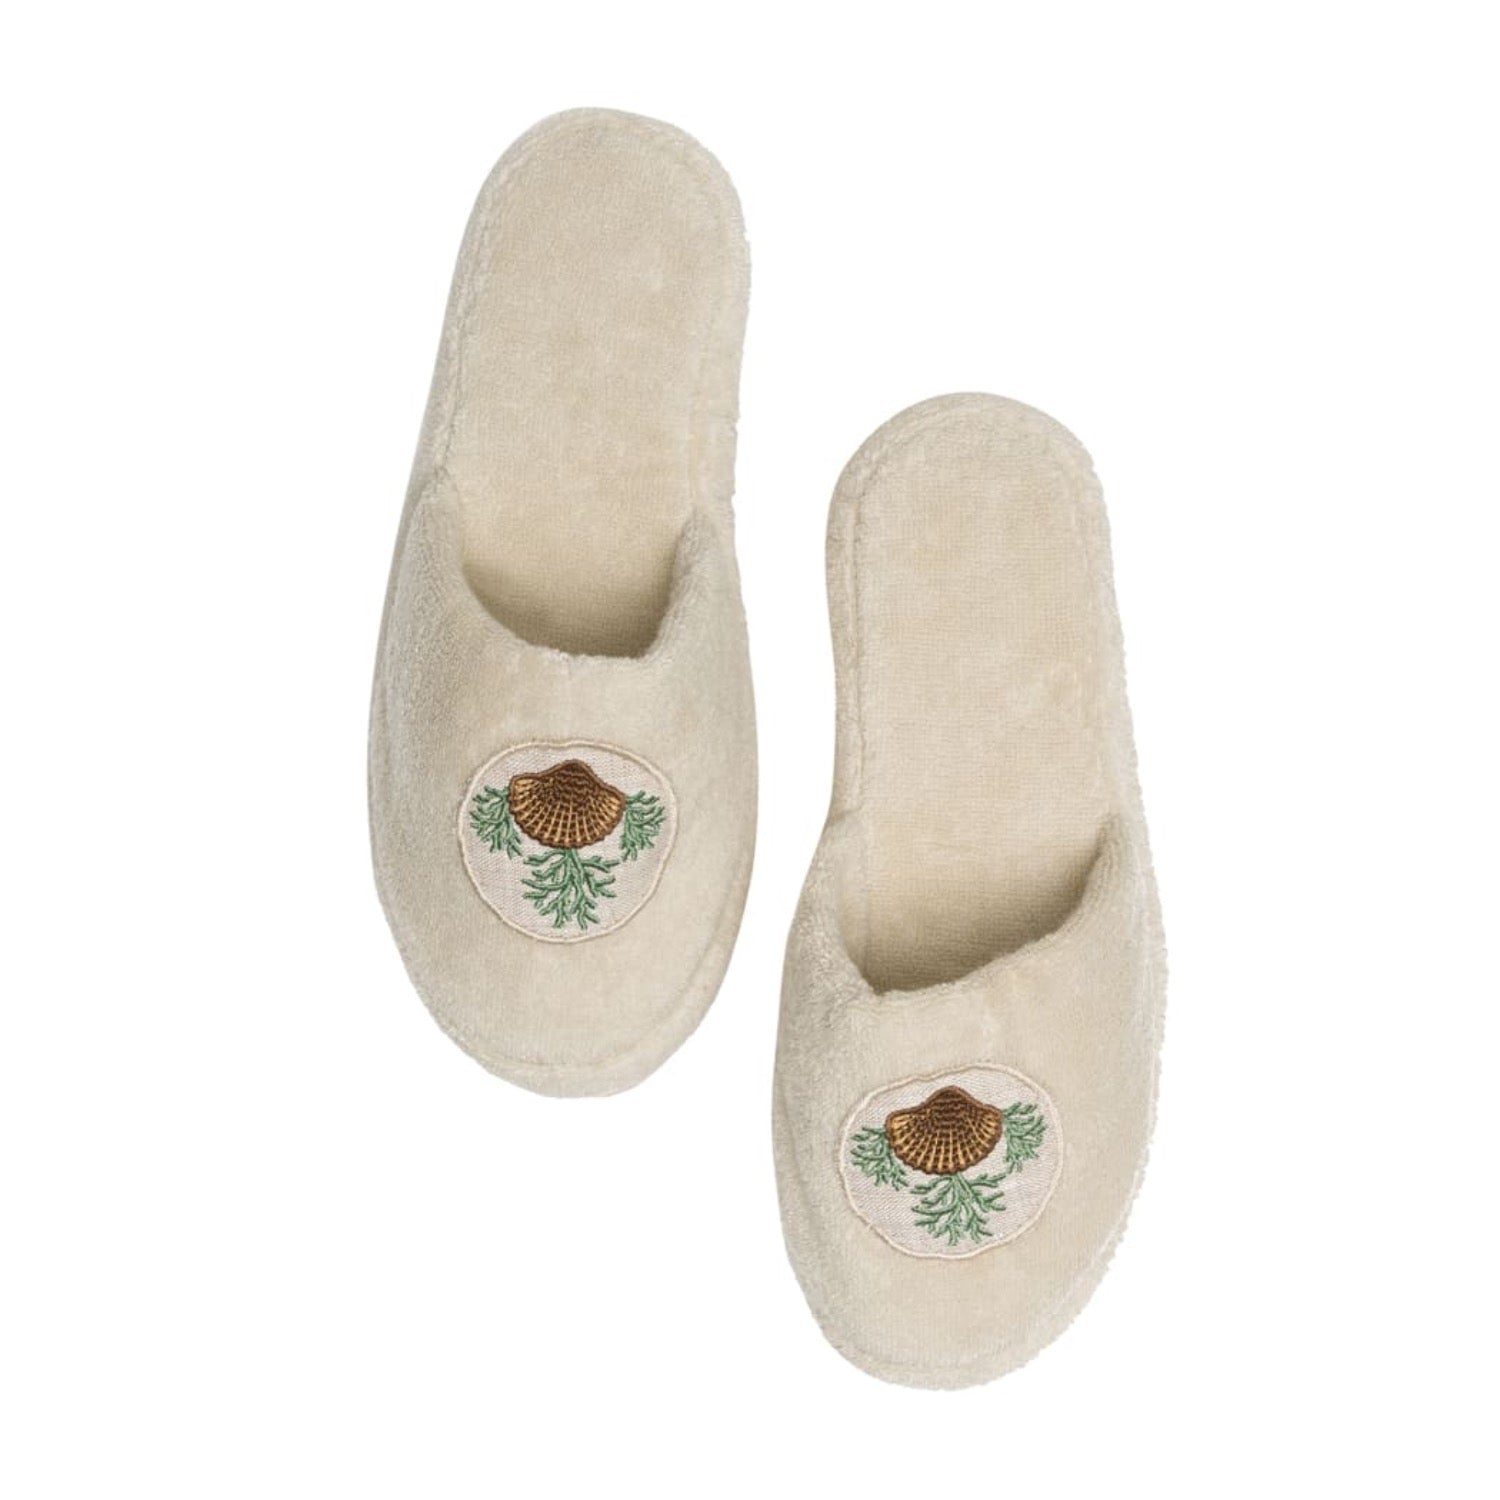 Seashell Embroidery Cotton Bath Slippers